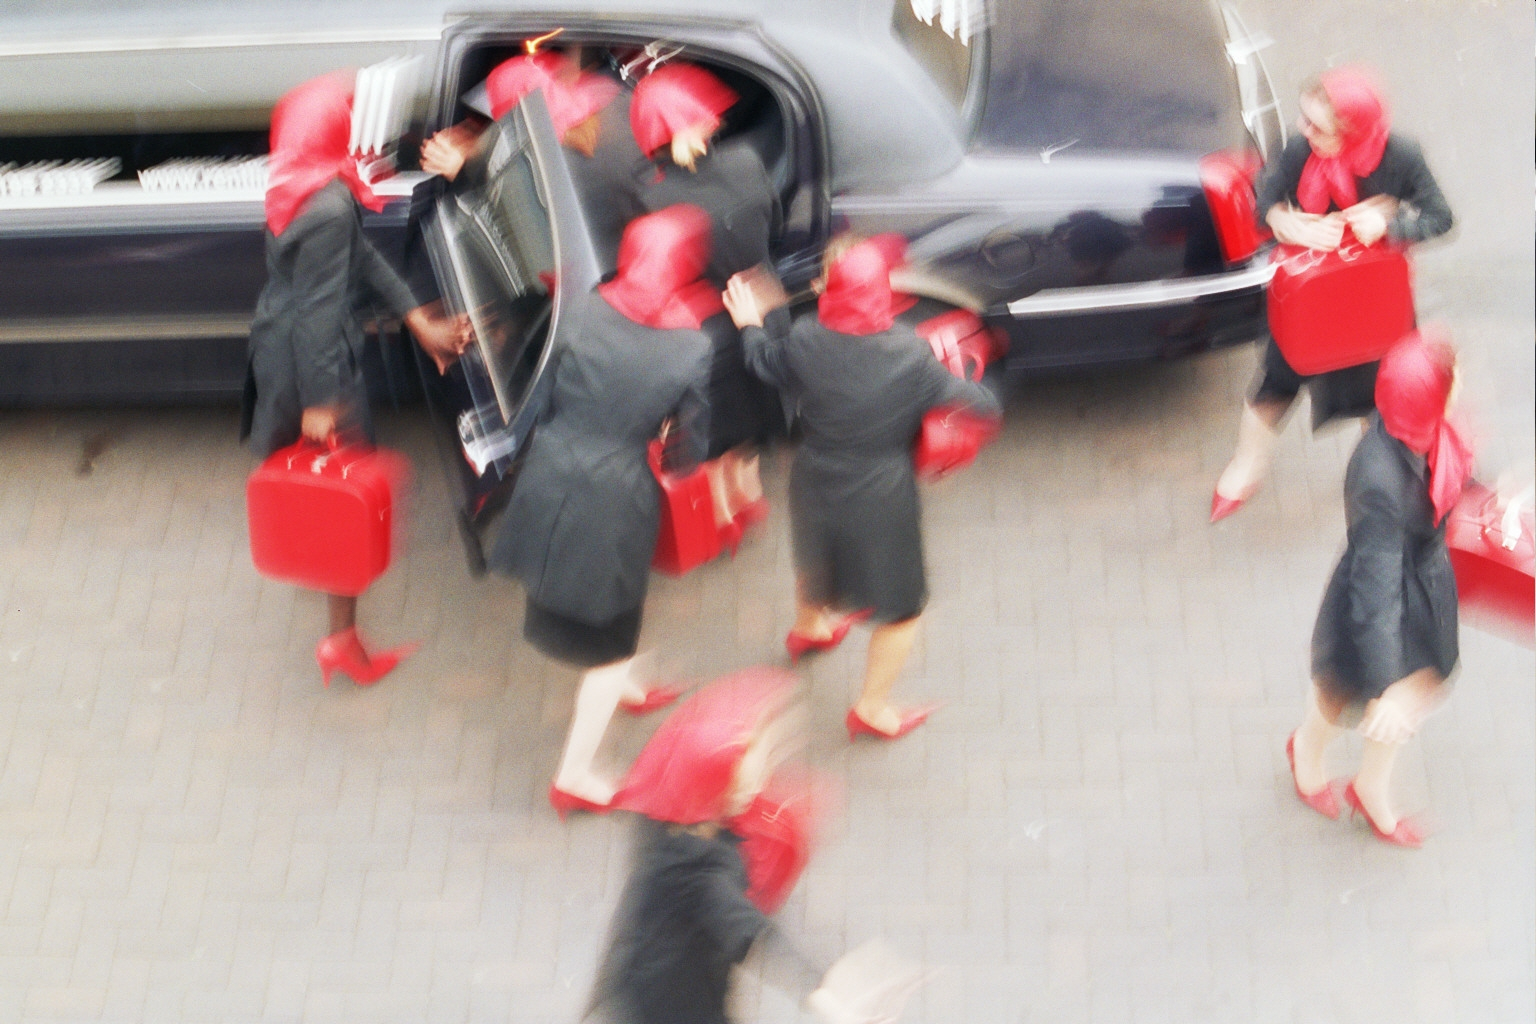 An image of identically dressed ladies getting out of a taxi. The picture is blurred.